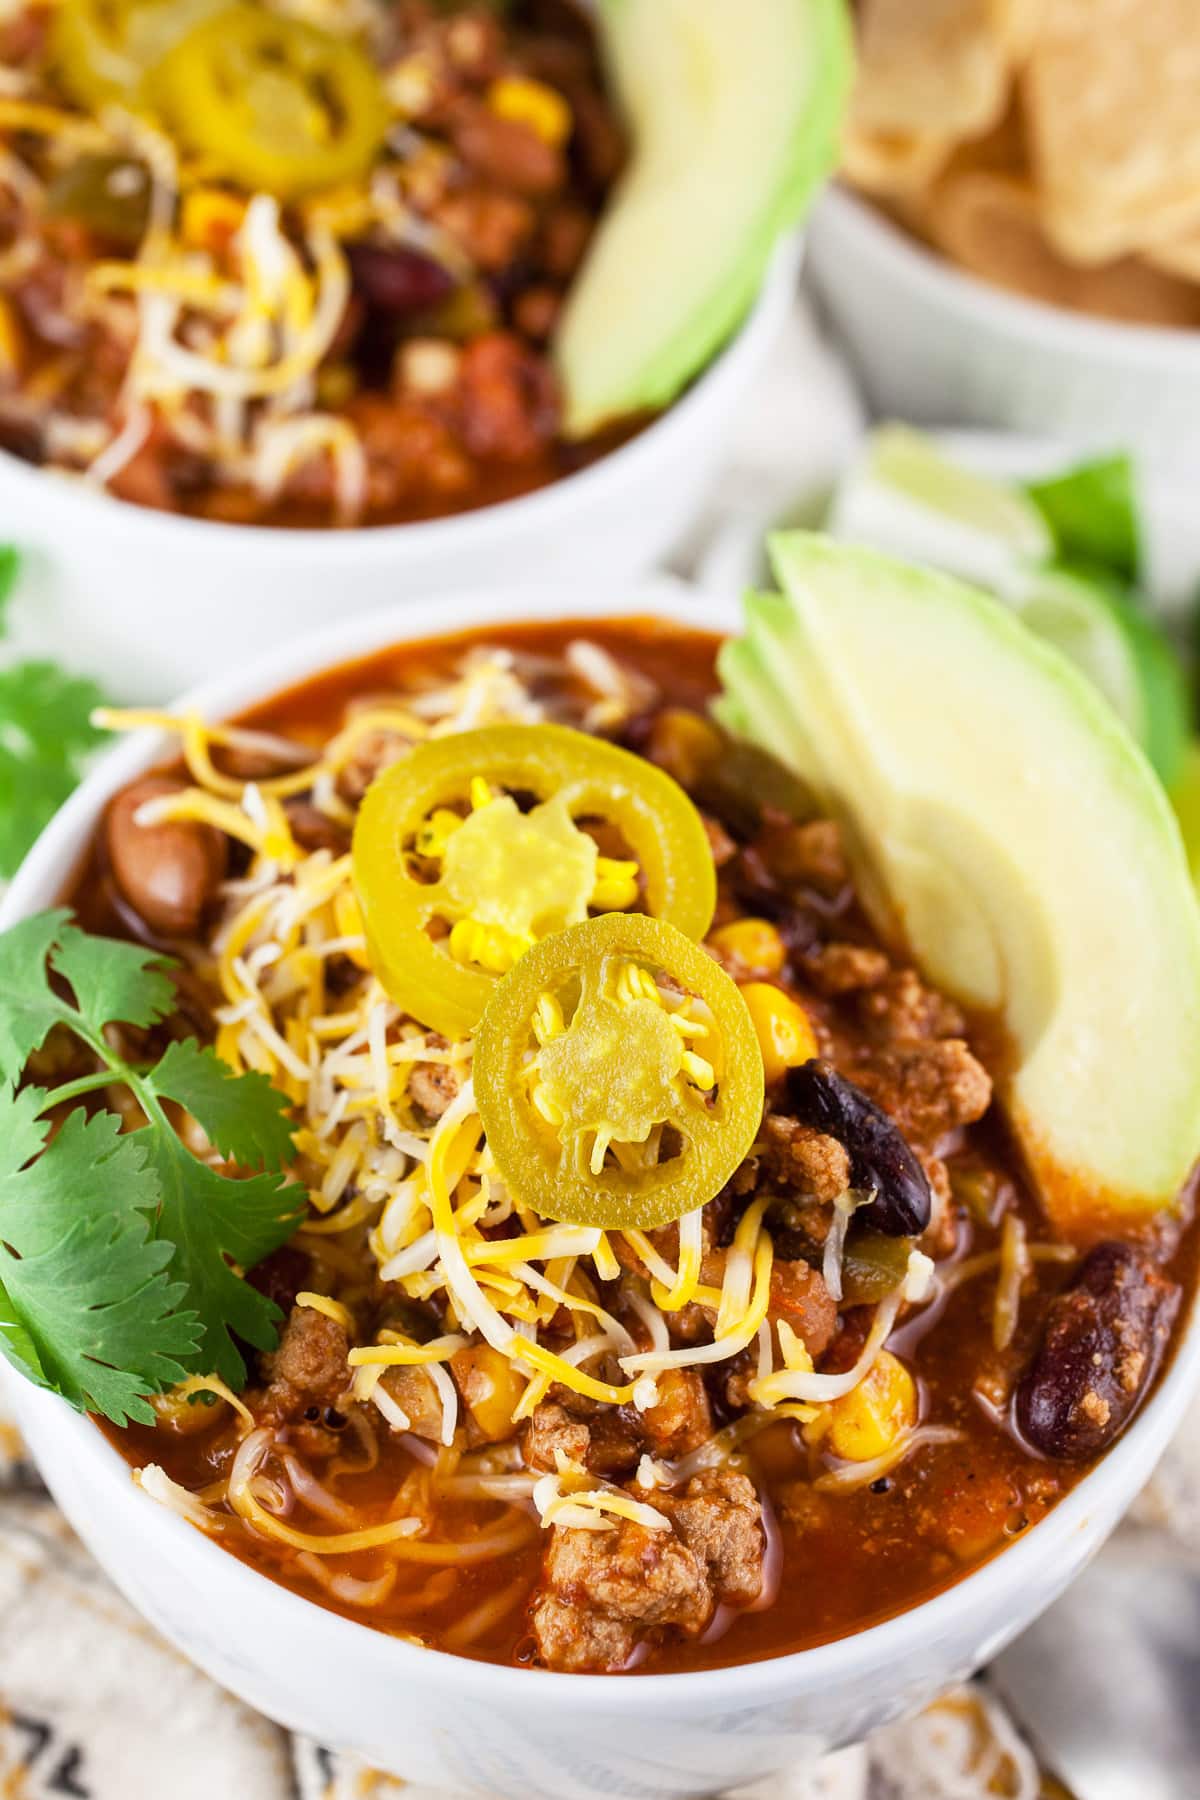 Slow cooker turkey chili in white bowls with sliced avocado, cilantro, shredded cheese, and pickled jalapeno peppers.